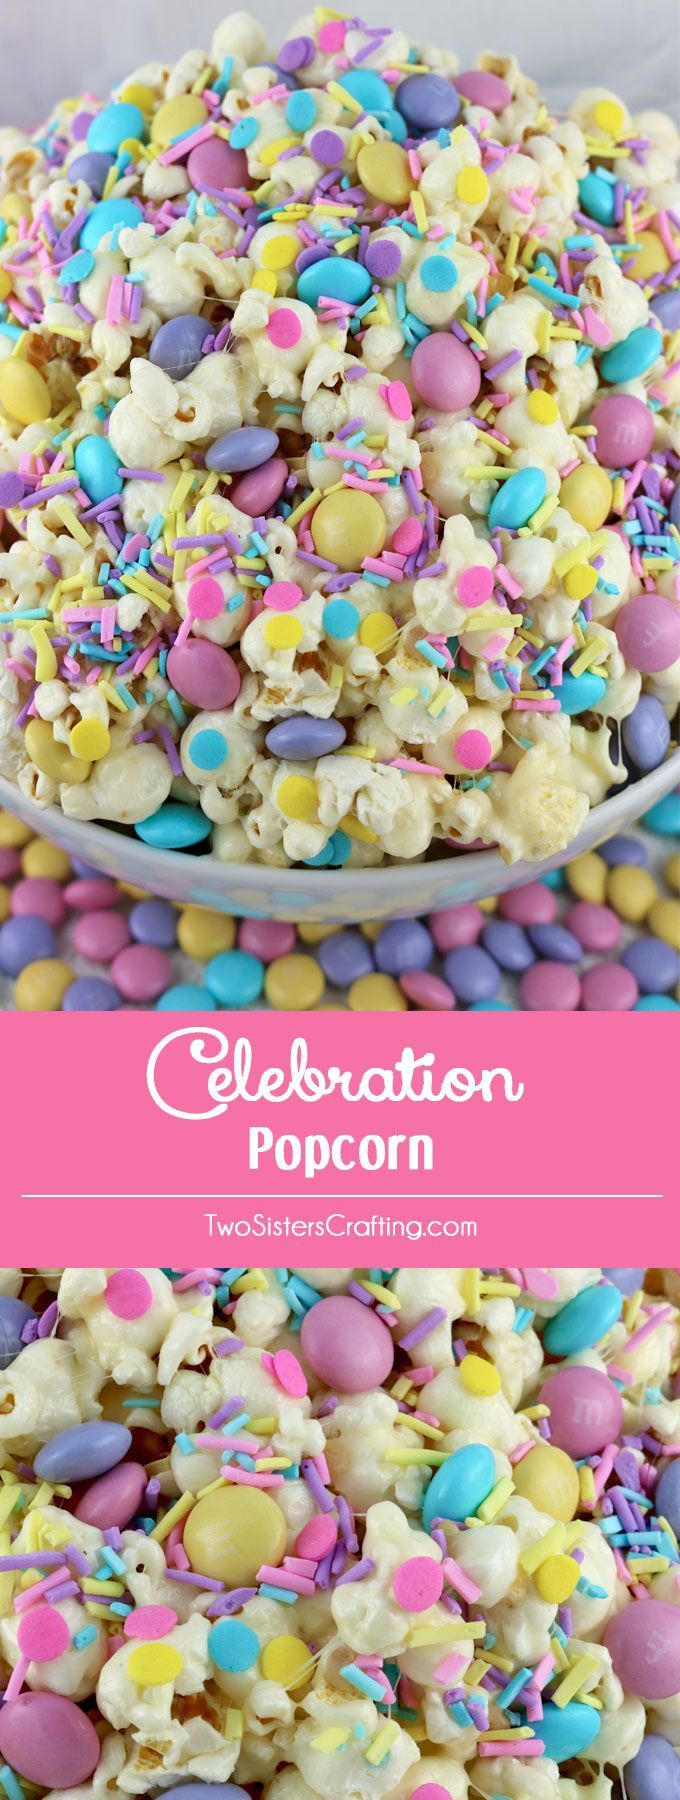 Celebration Popcorn – a colorful and yummy popcorn treat that would be a great Easter dessert or wow at a Birthday Party, a Baby